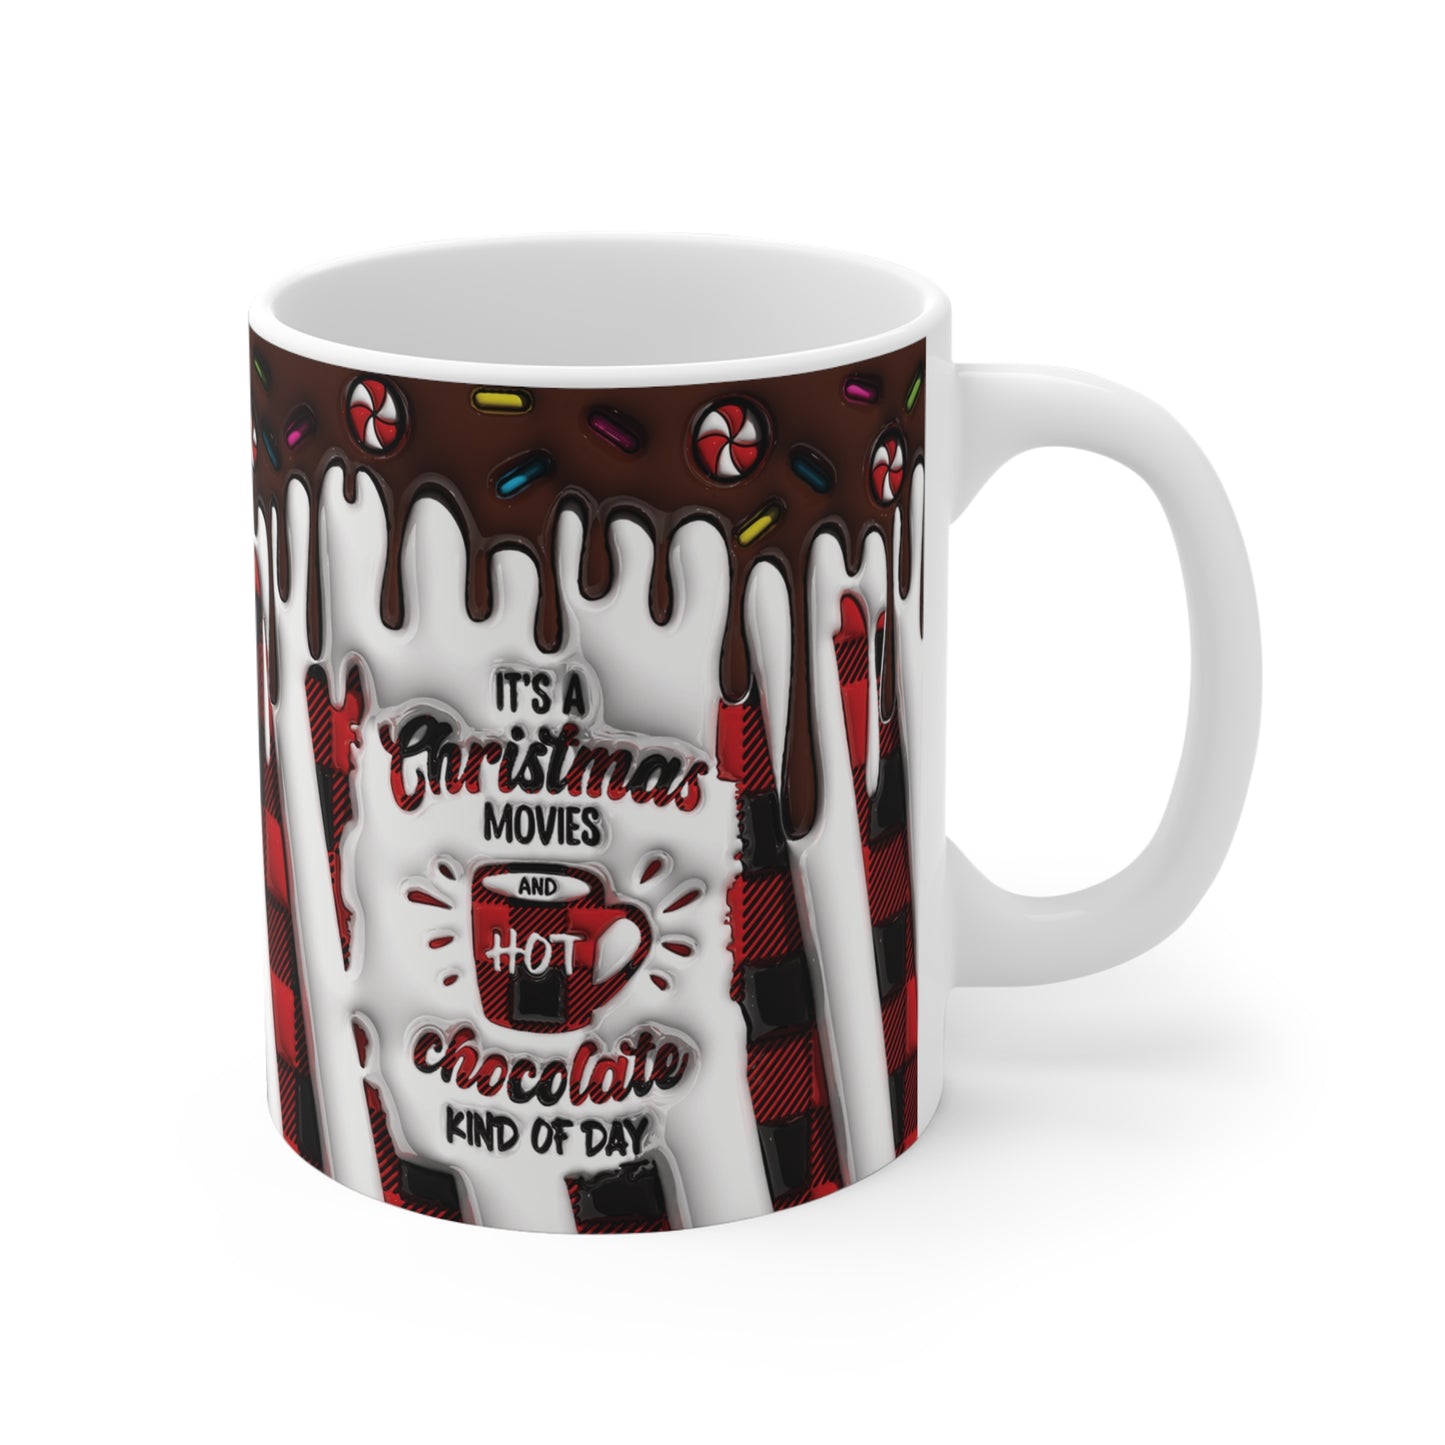 It's a Christmas Movie and Hot Chocolate Kind of Day Mug - with 3D Puffy Effect - Mug 11oz